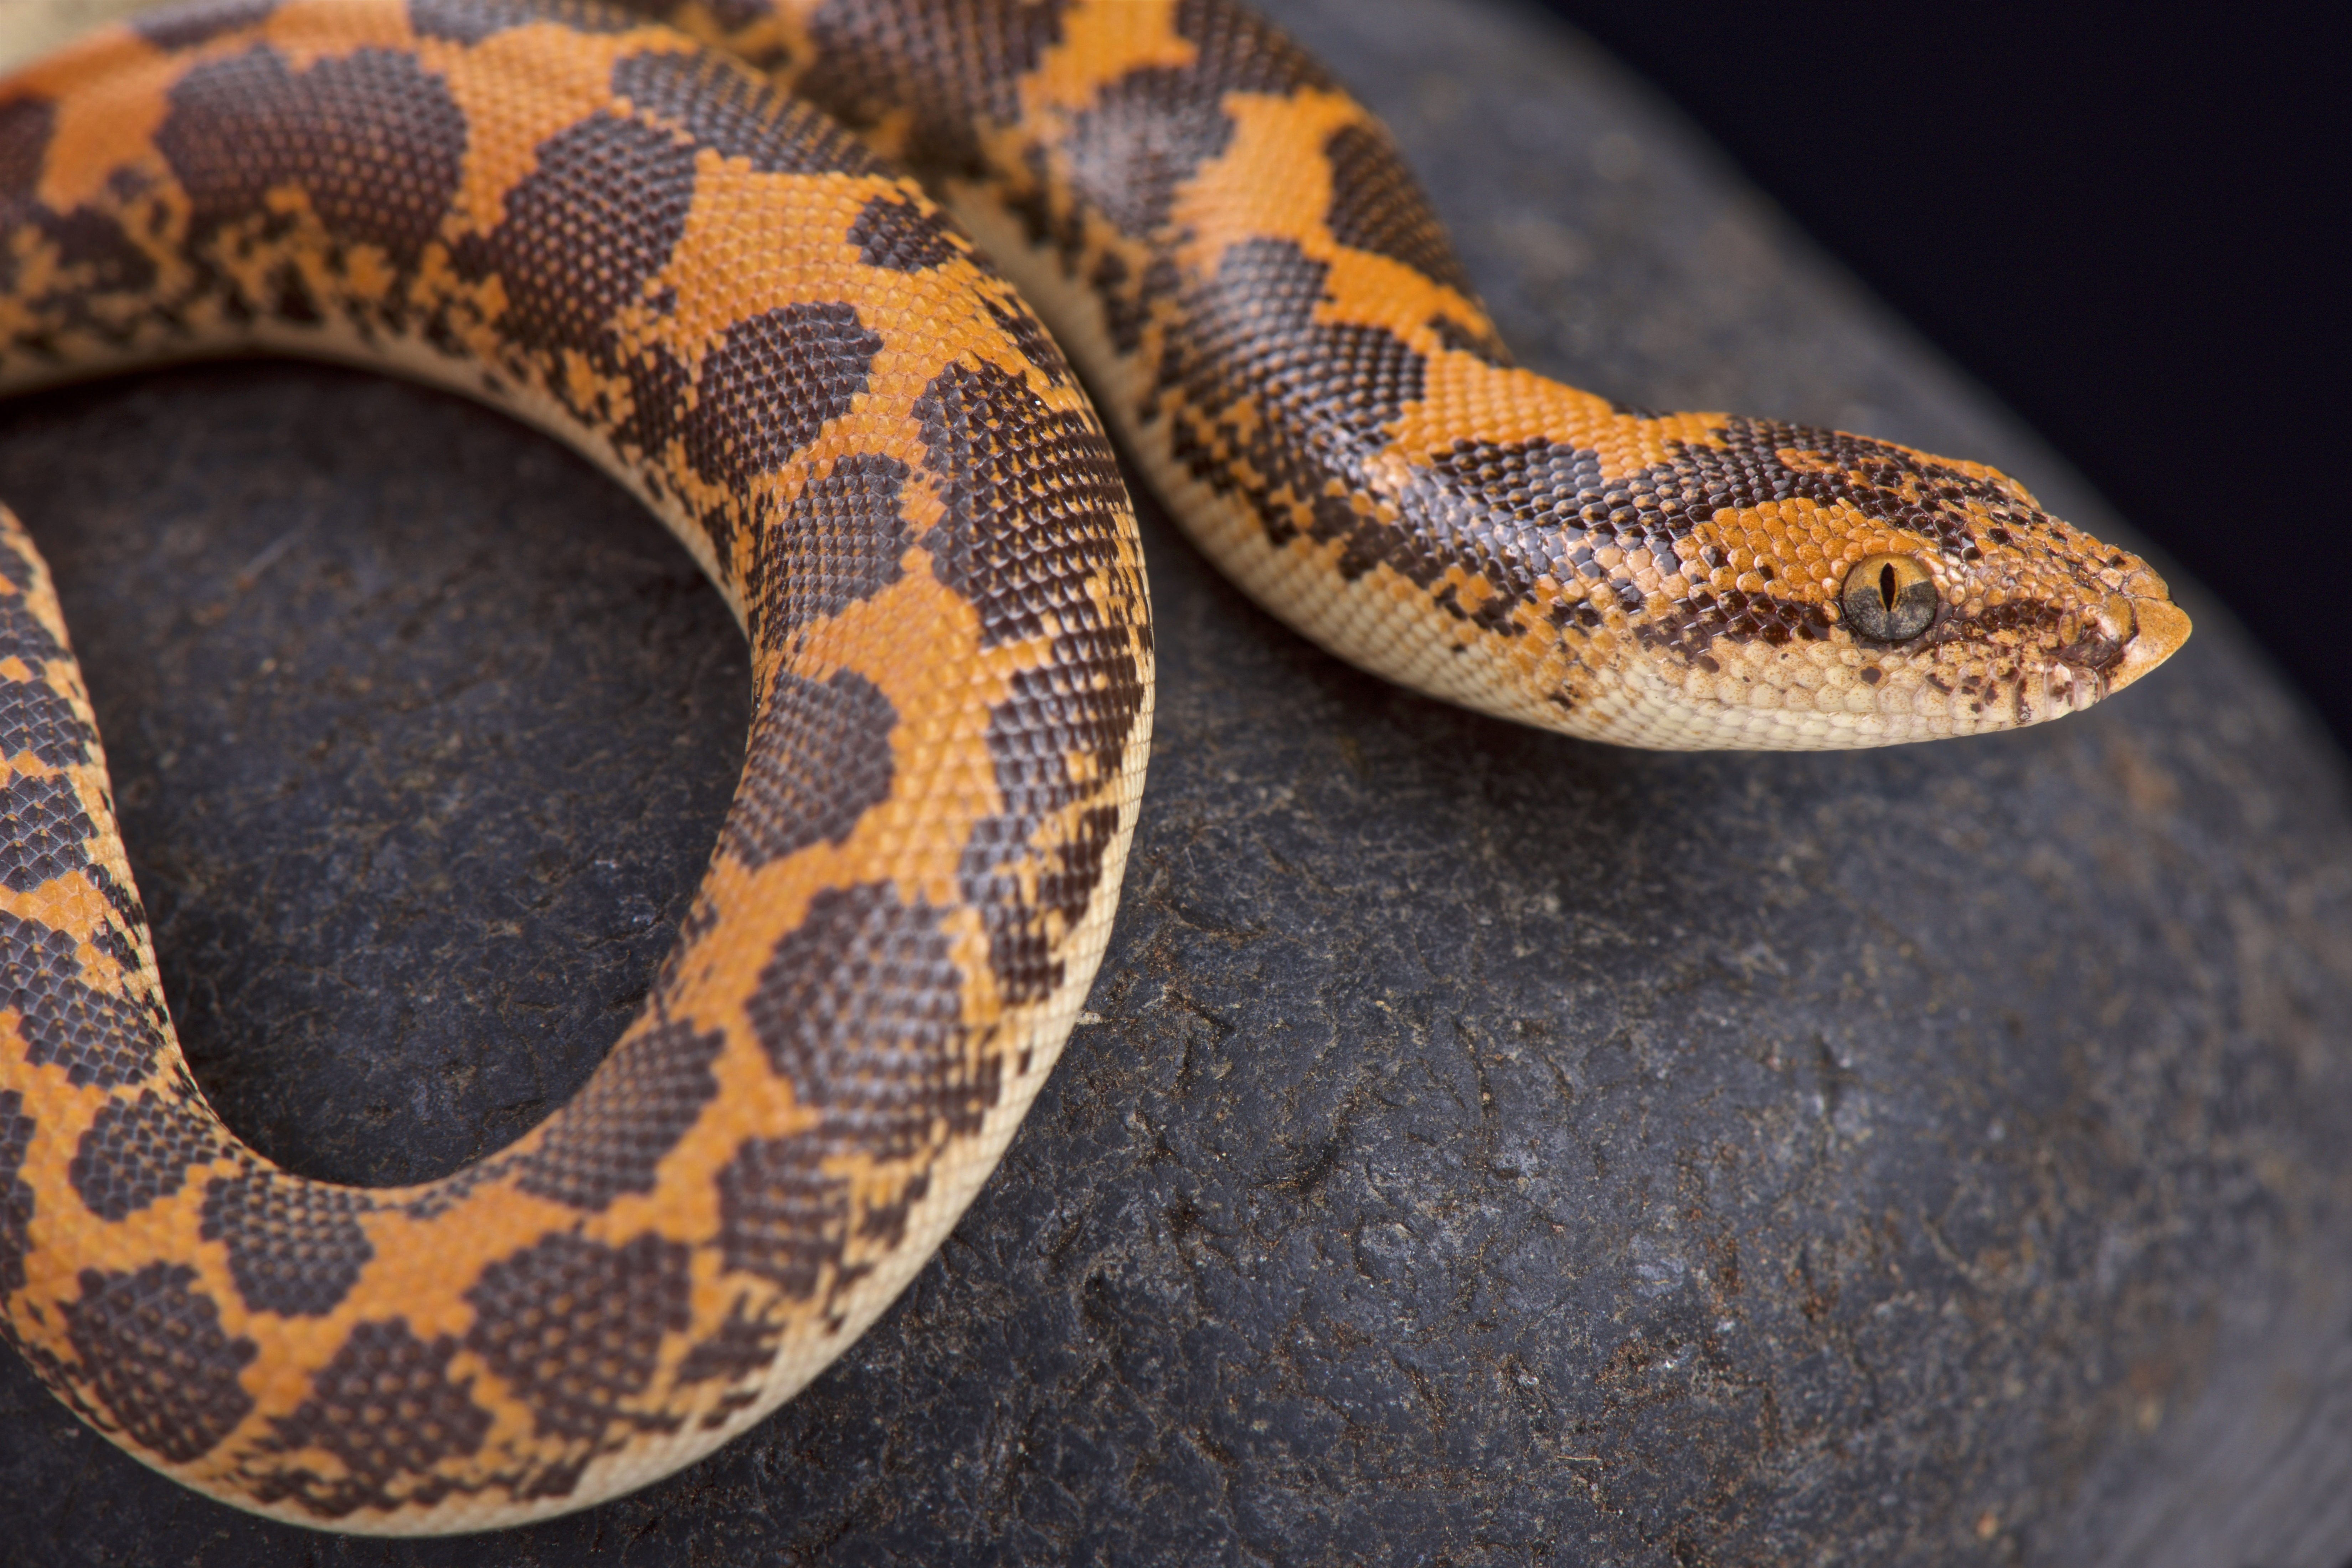 A Kenyan sand boa | Source: Getty Images